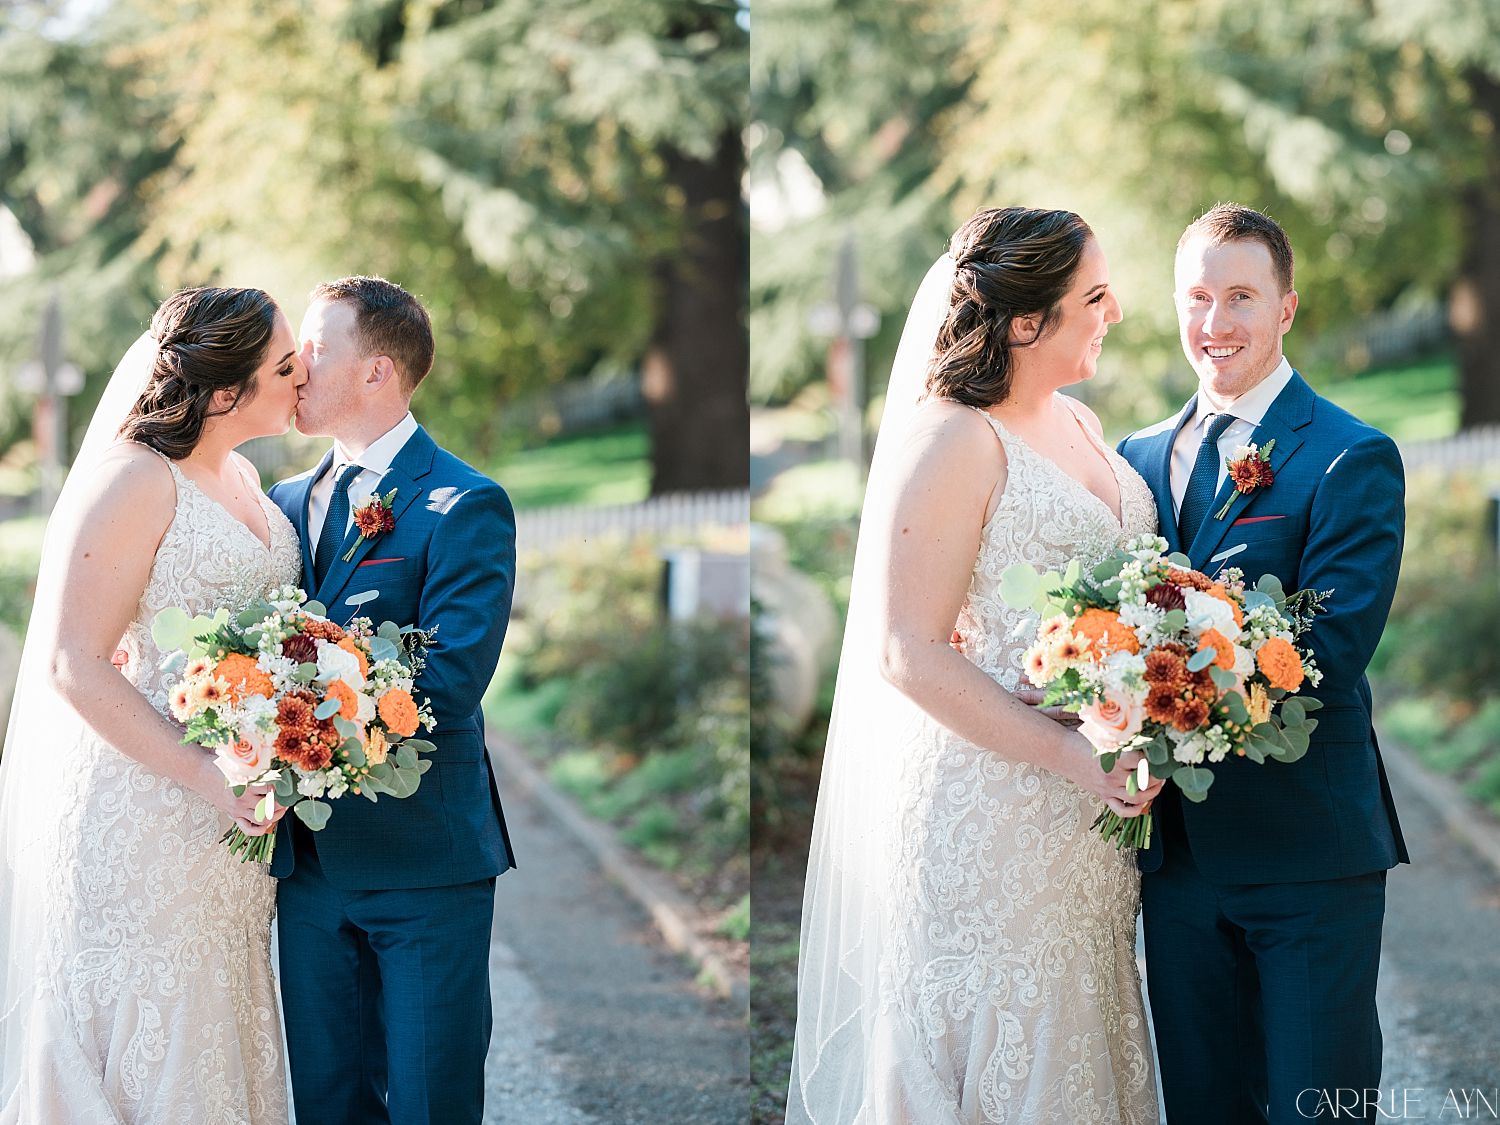 Sequoia Wedding Photographer in Placerville